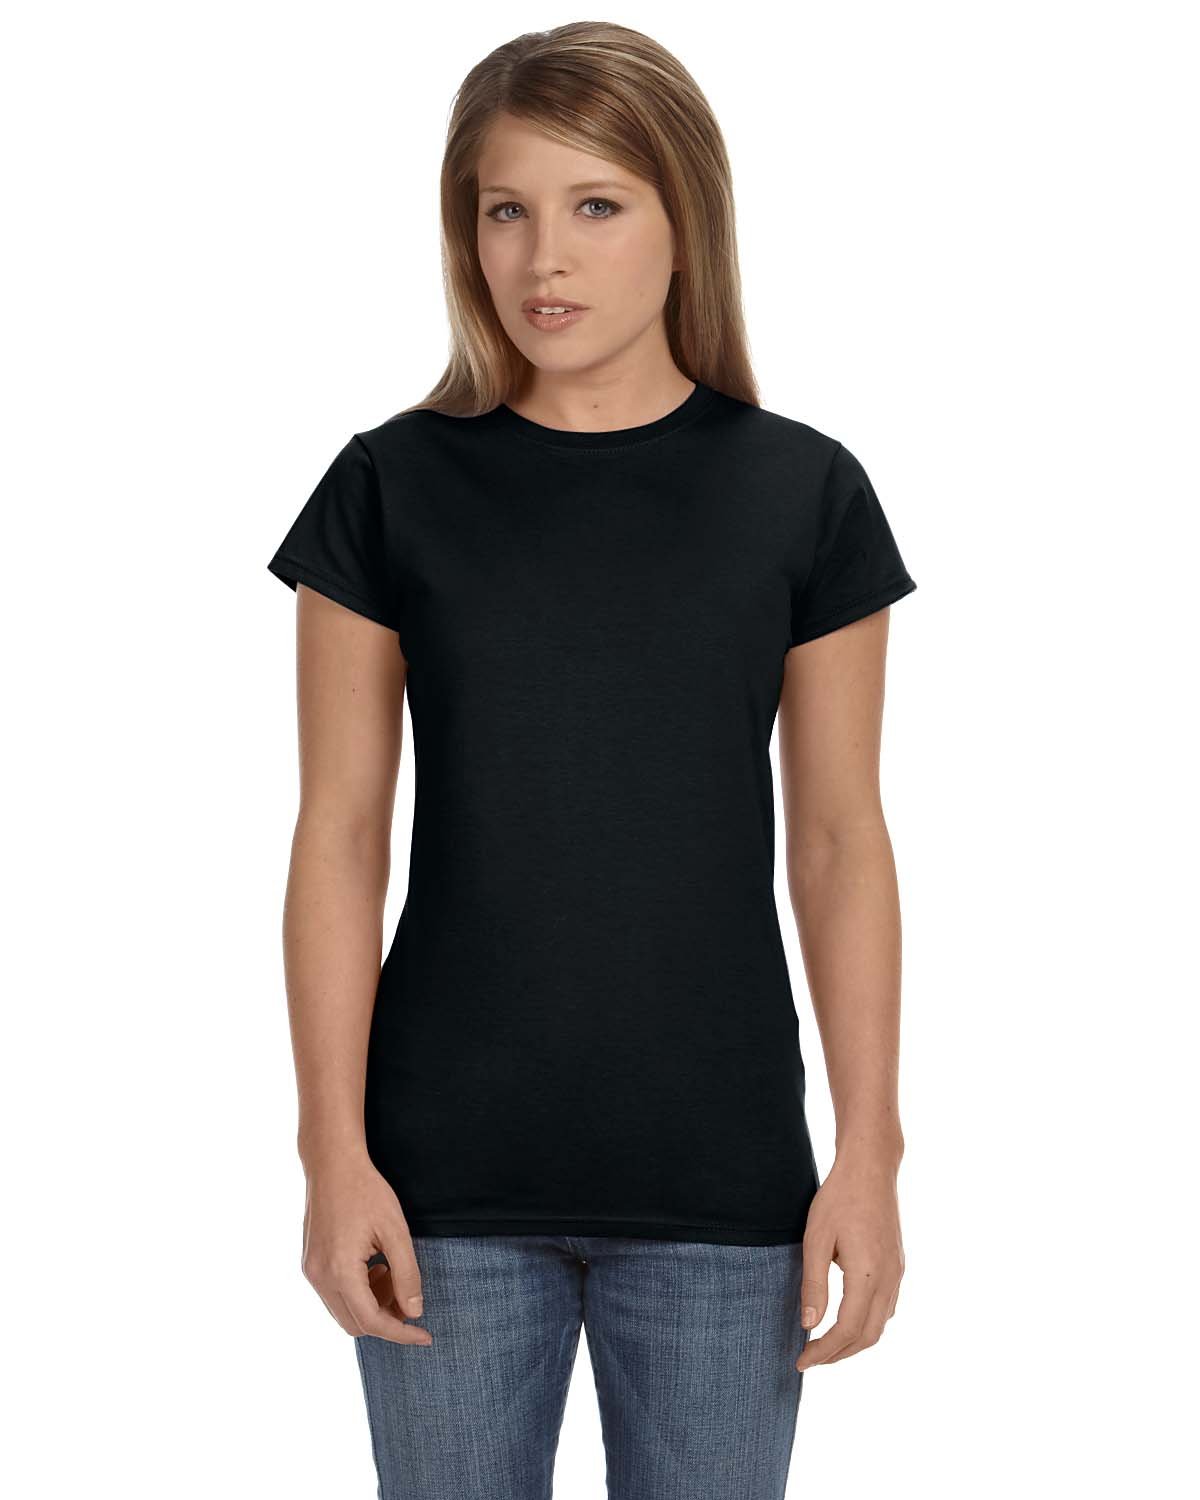 Gildan Ladies' Softstyle® Fitted T-Shirt BLACK 